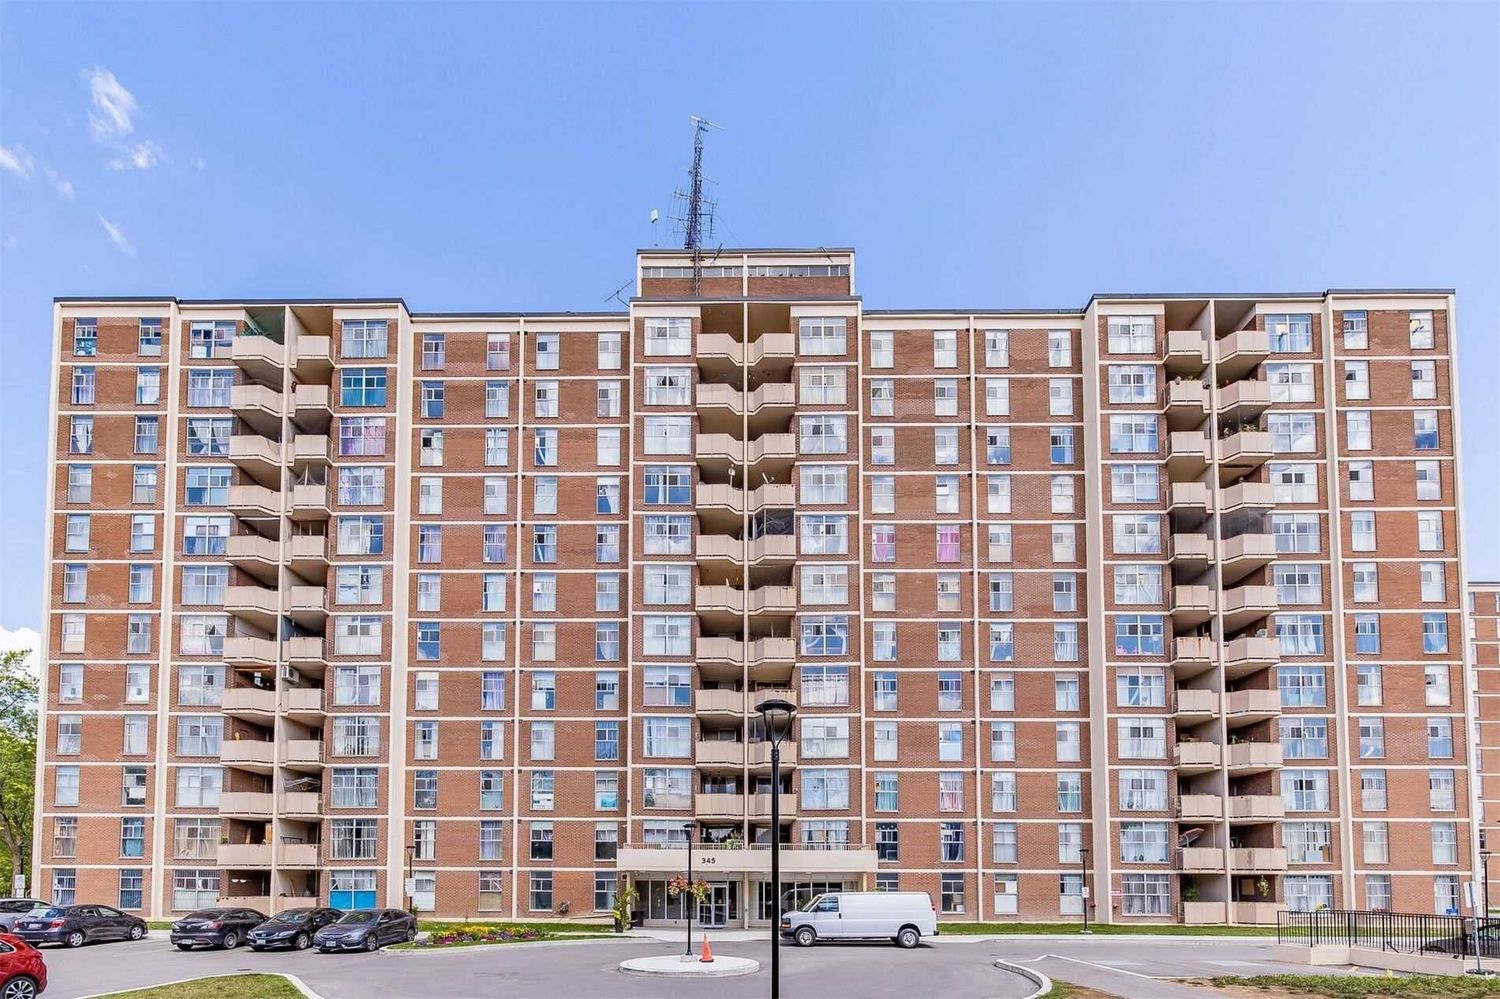 335-353 Driftwood Avenue. 345 Driftwood Condos is located in  North York, Toronto - image #1 of 2